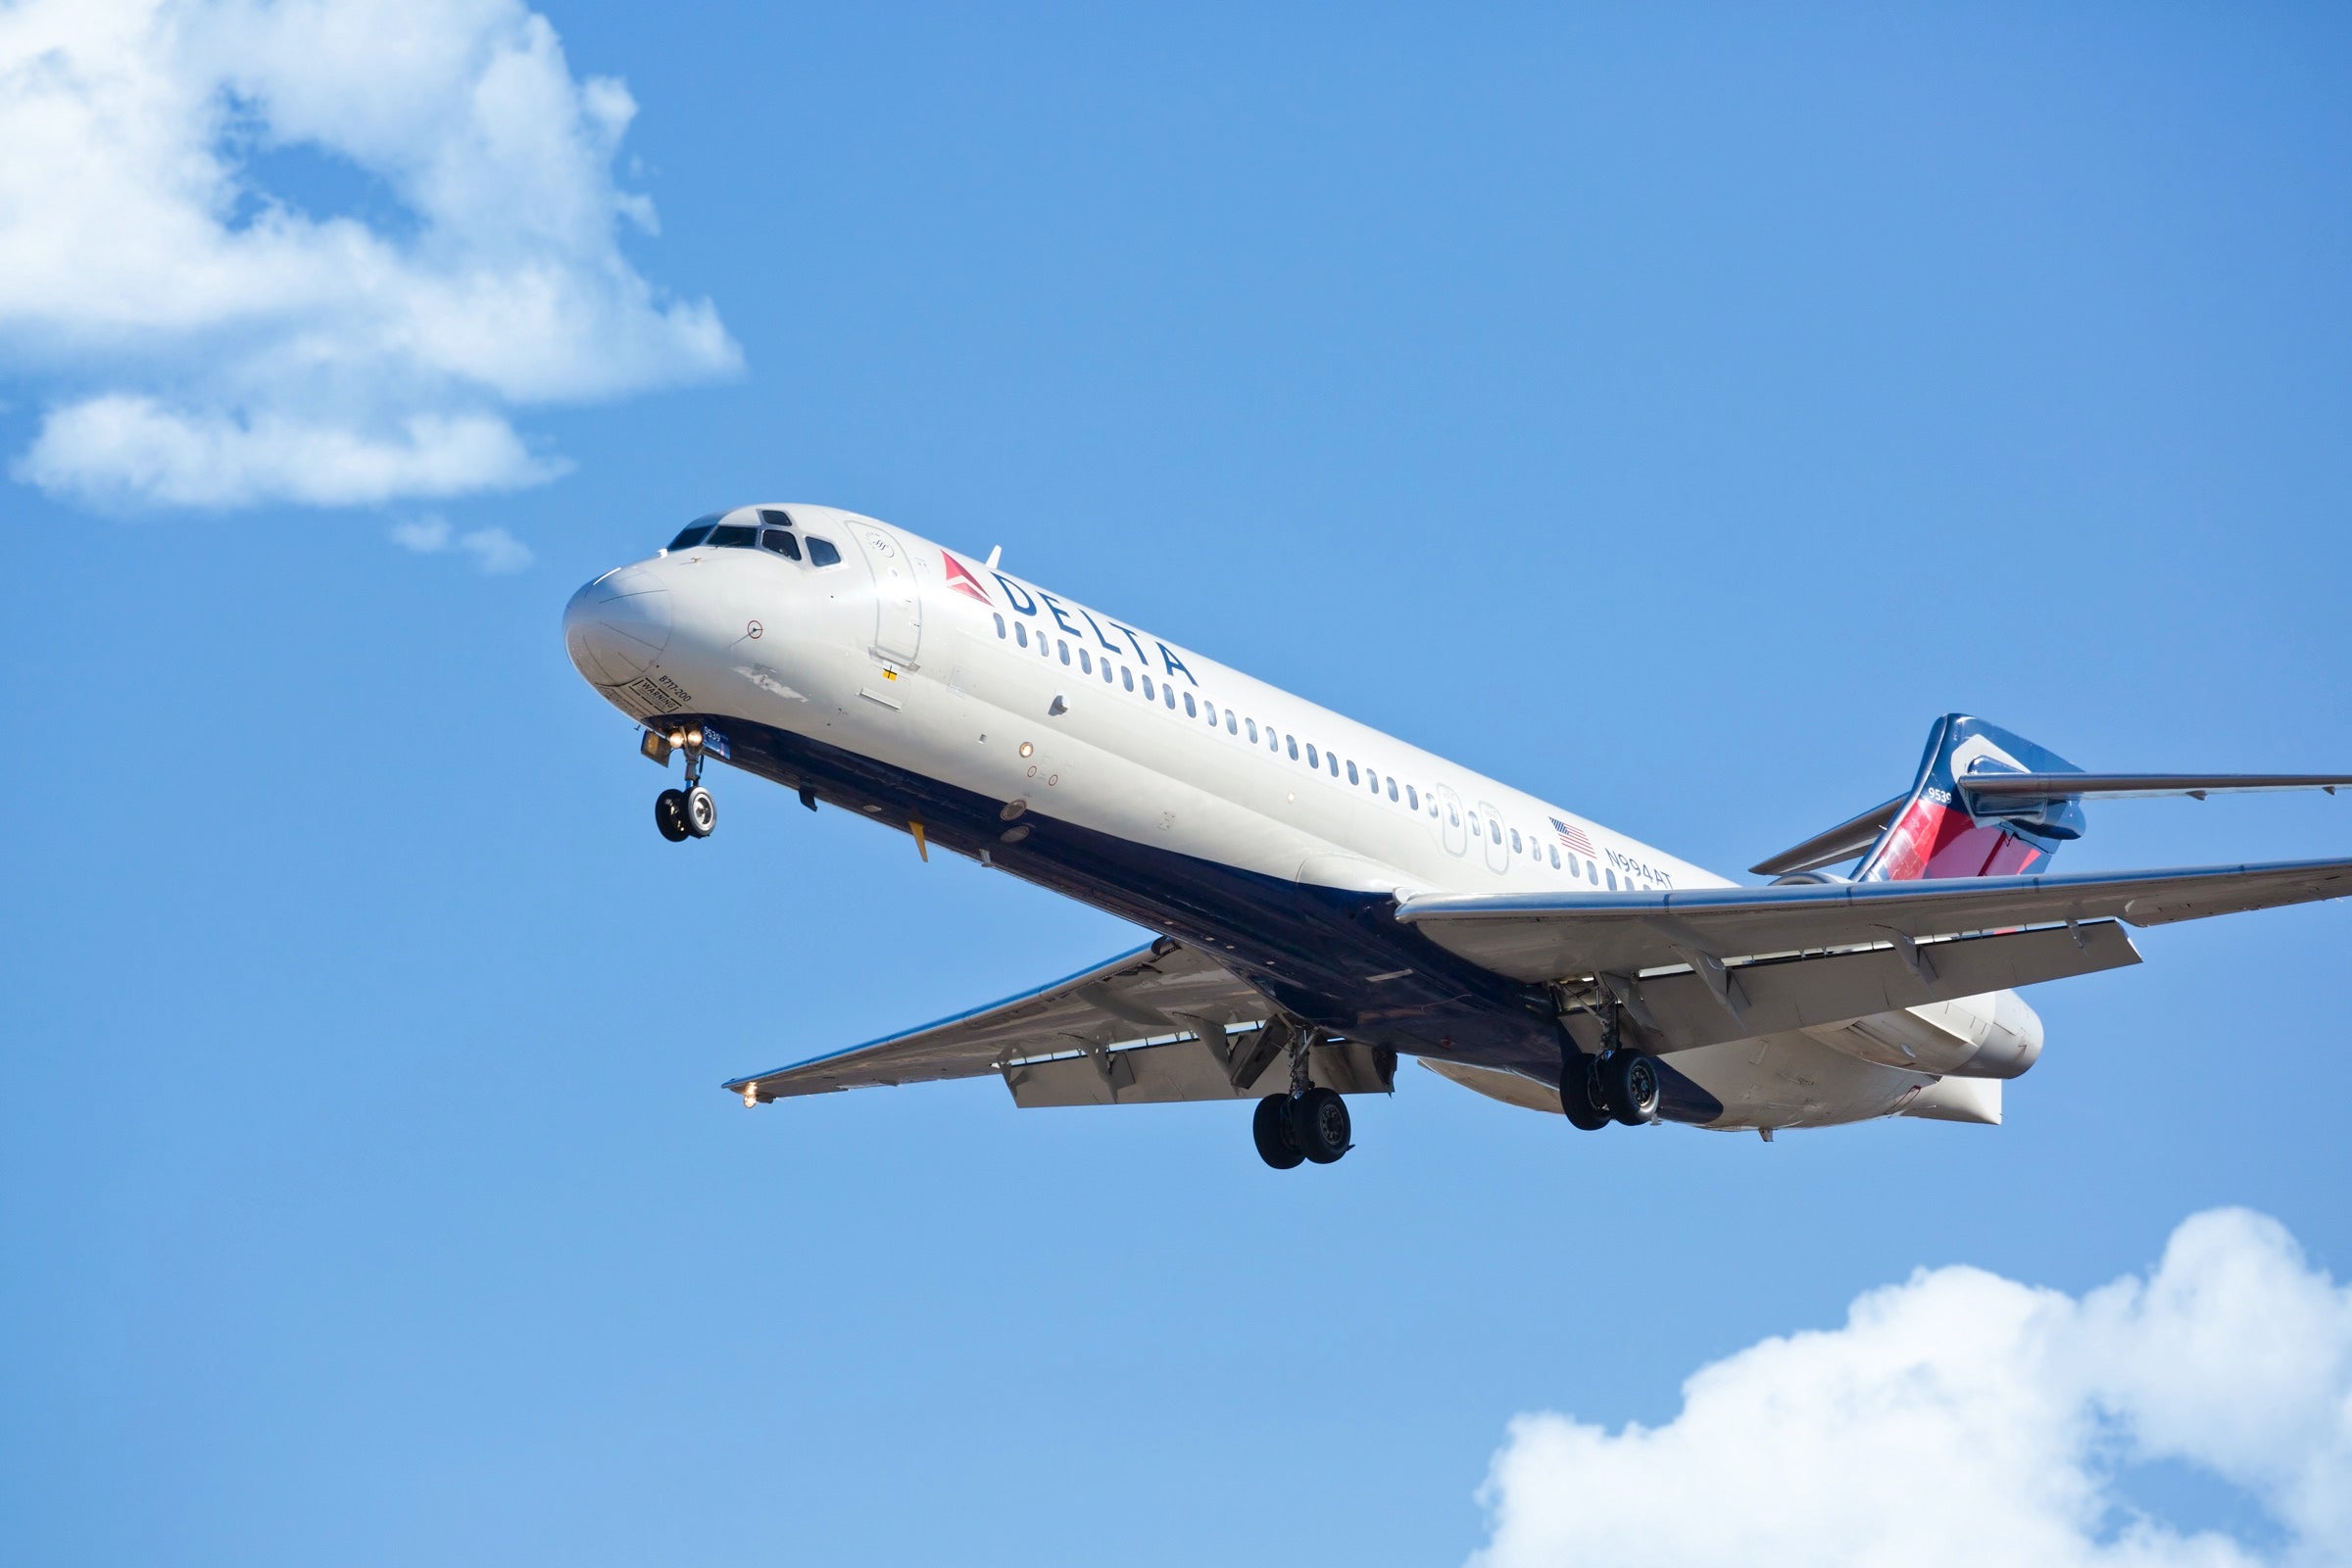 Delta 717 aircraft flying over Chicago Midway International Airport